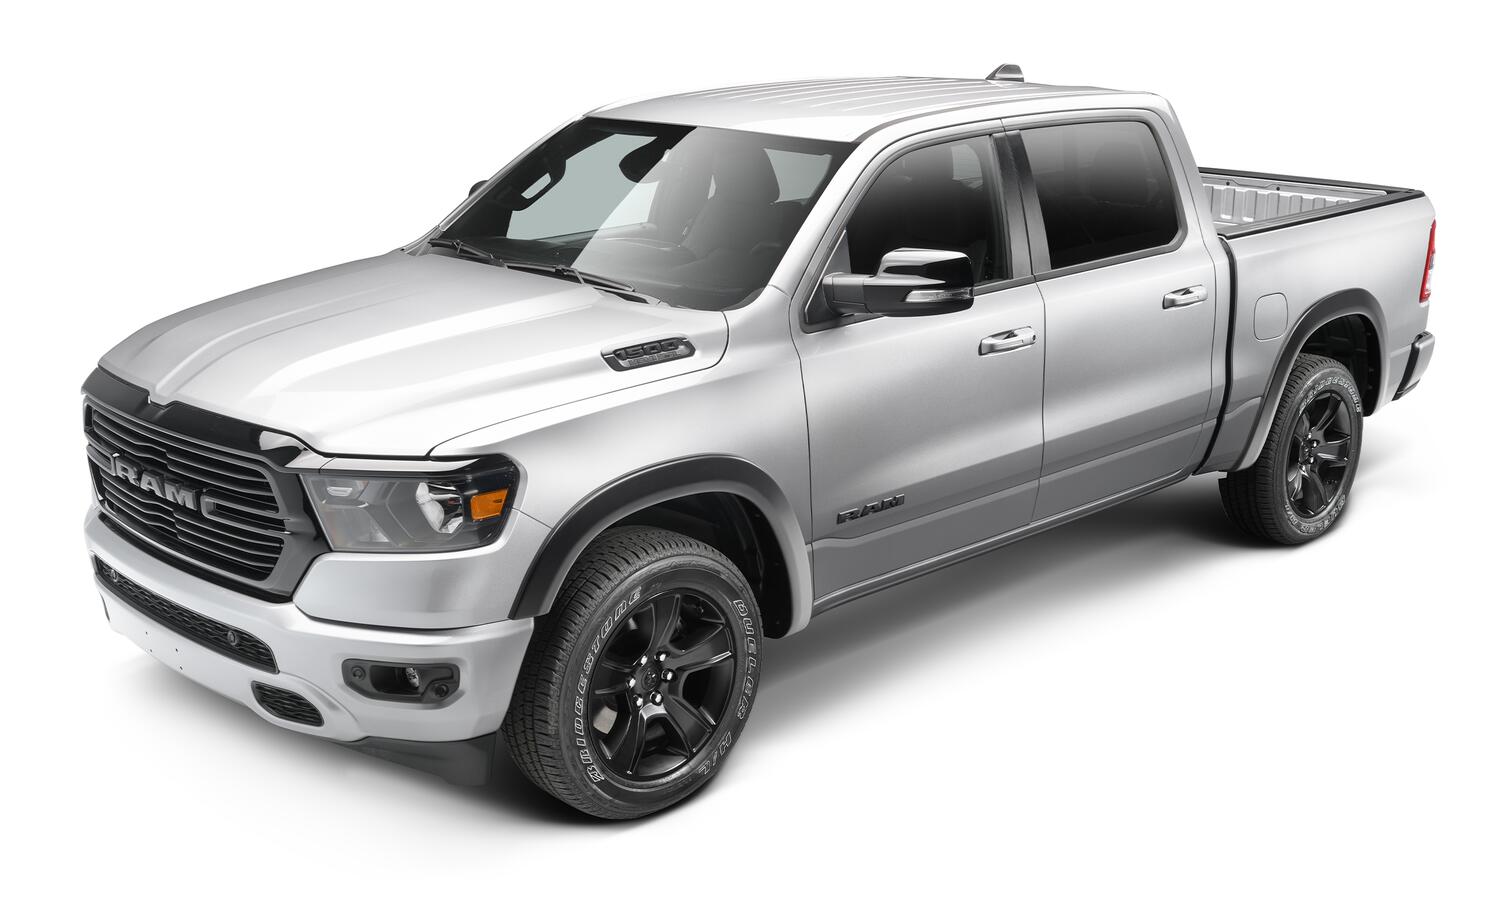 HKY_oeStyleFlares_21Ram1500Silver_3Qtr_2805928.jpg